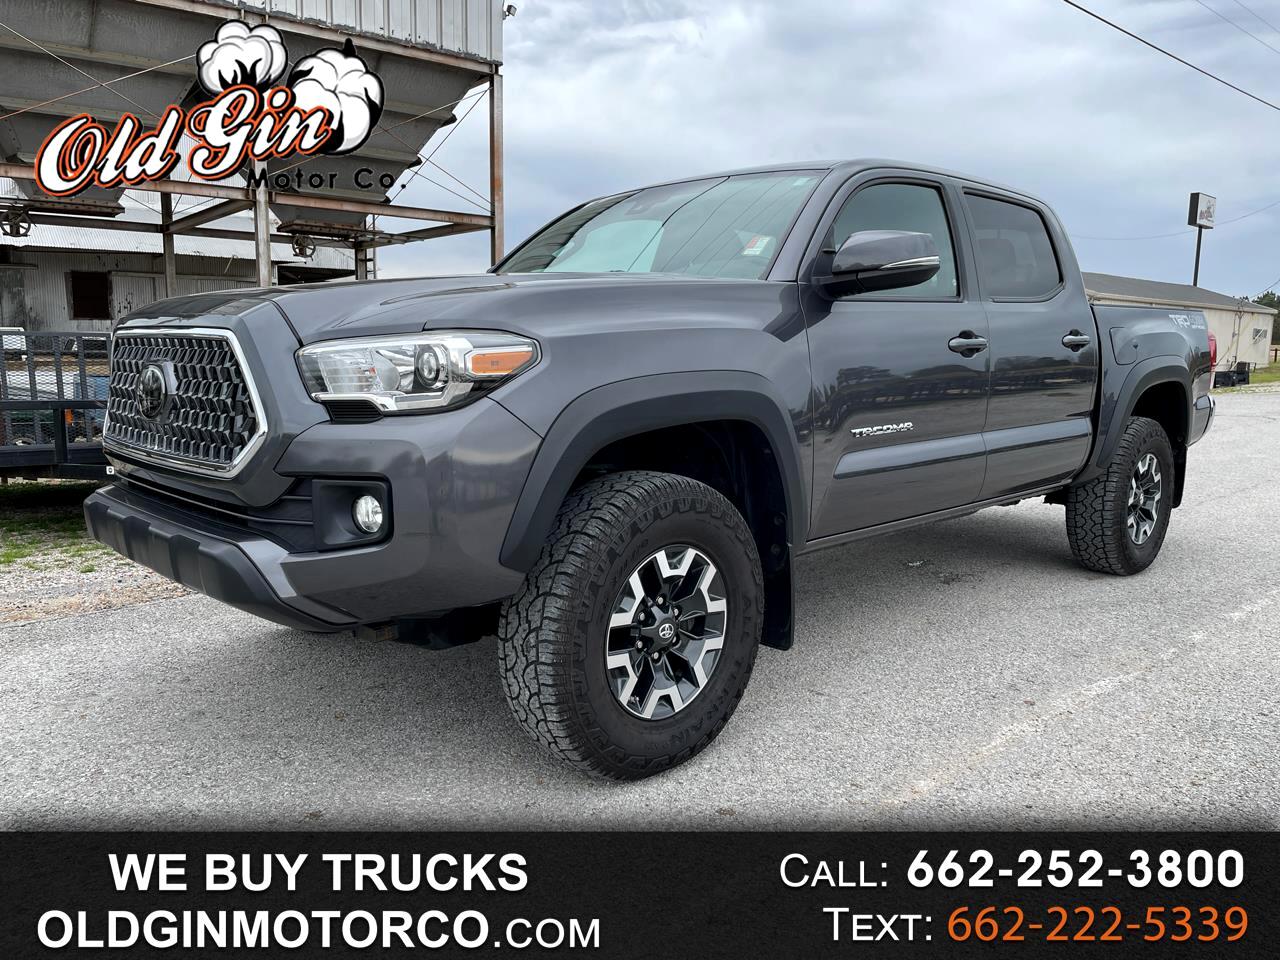 2018 Toyota Tacoma TRD Offroad Dbl Cab 4WD V6 6sp